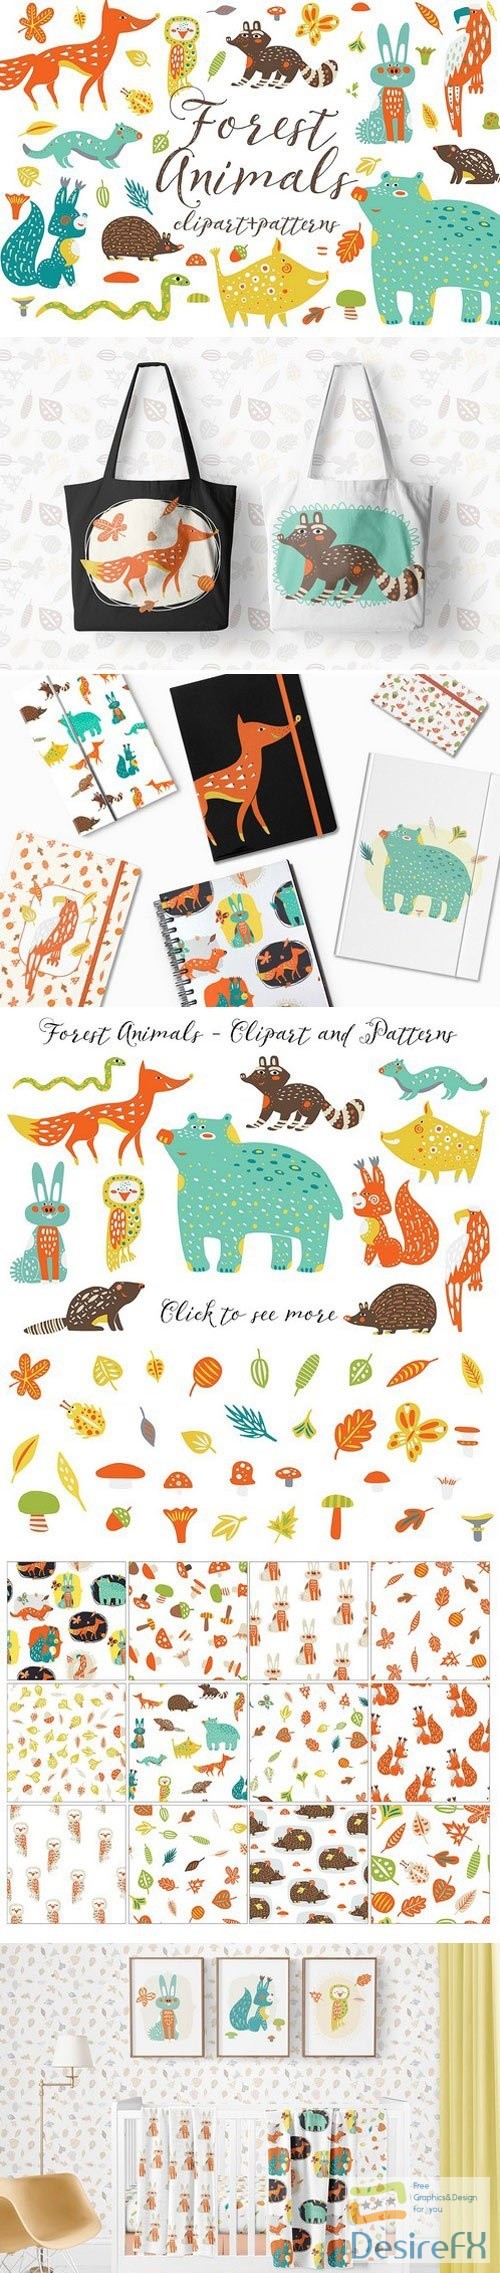 Cute Forest Animals Clipart 1551874